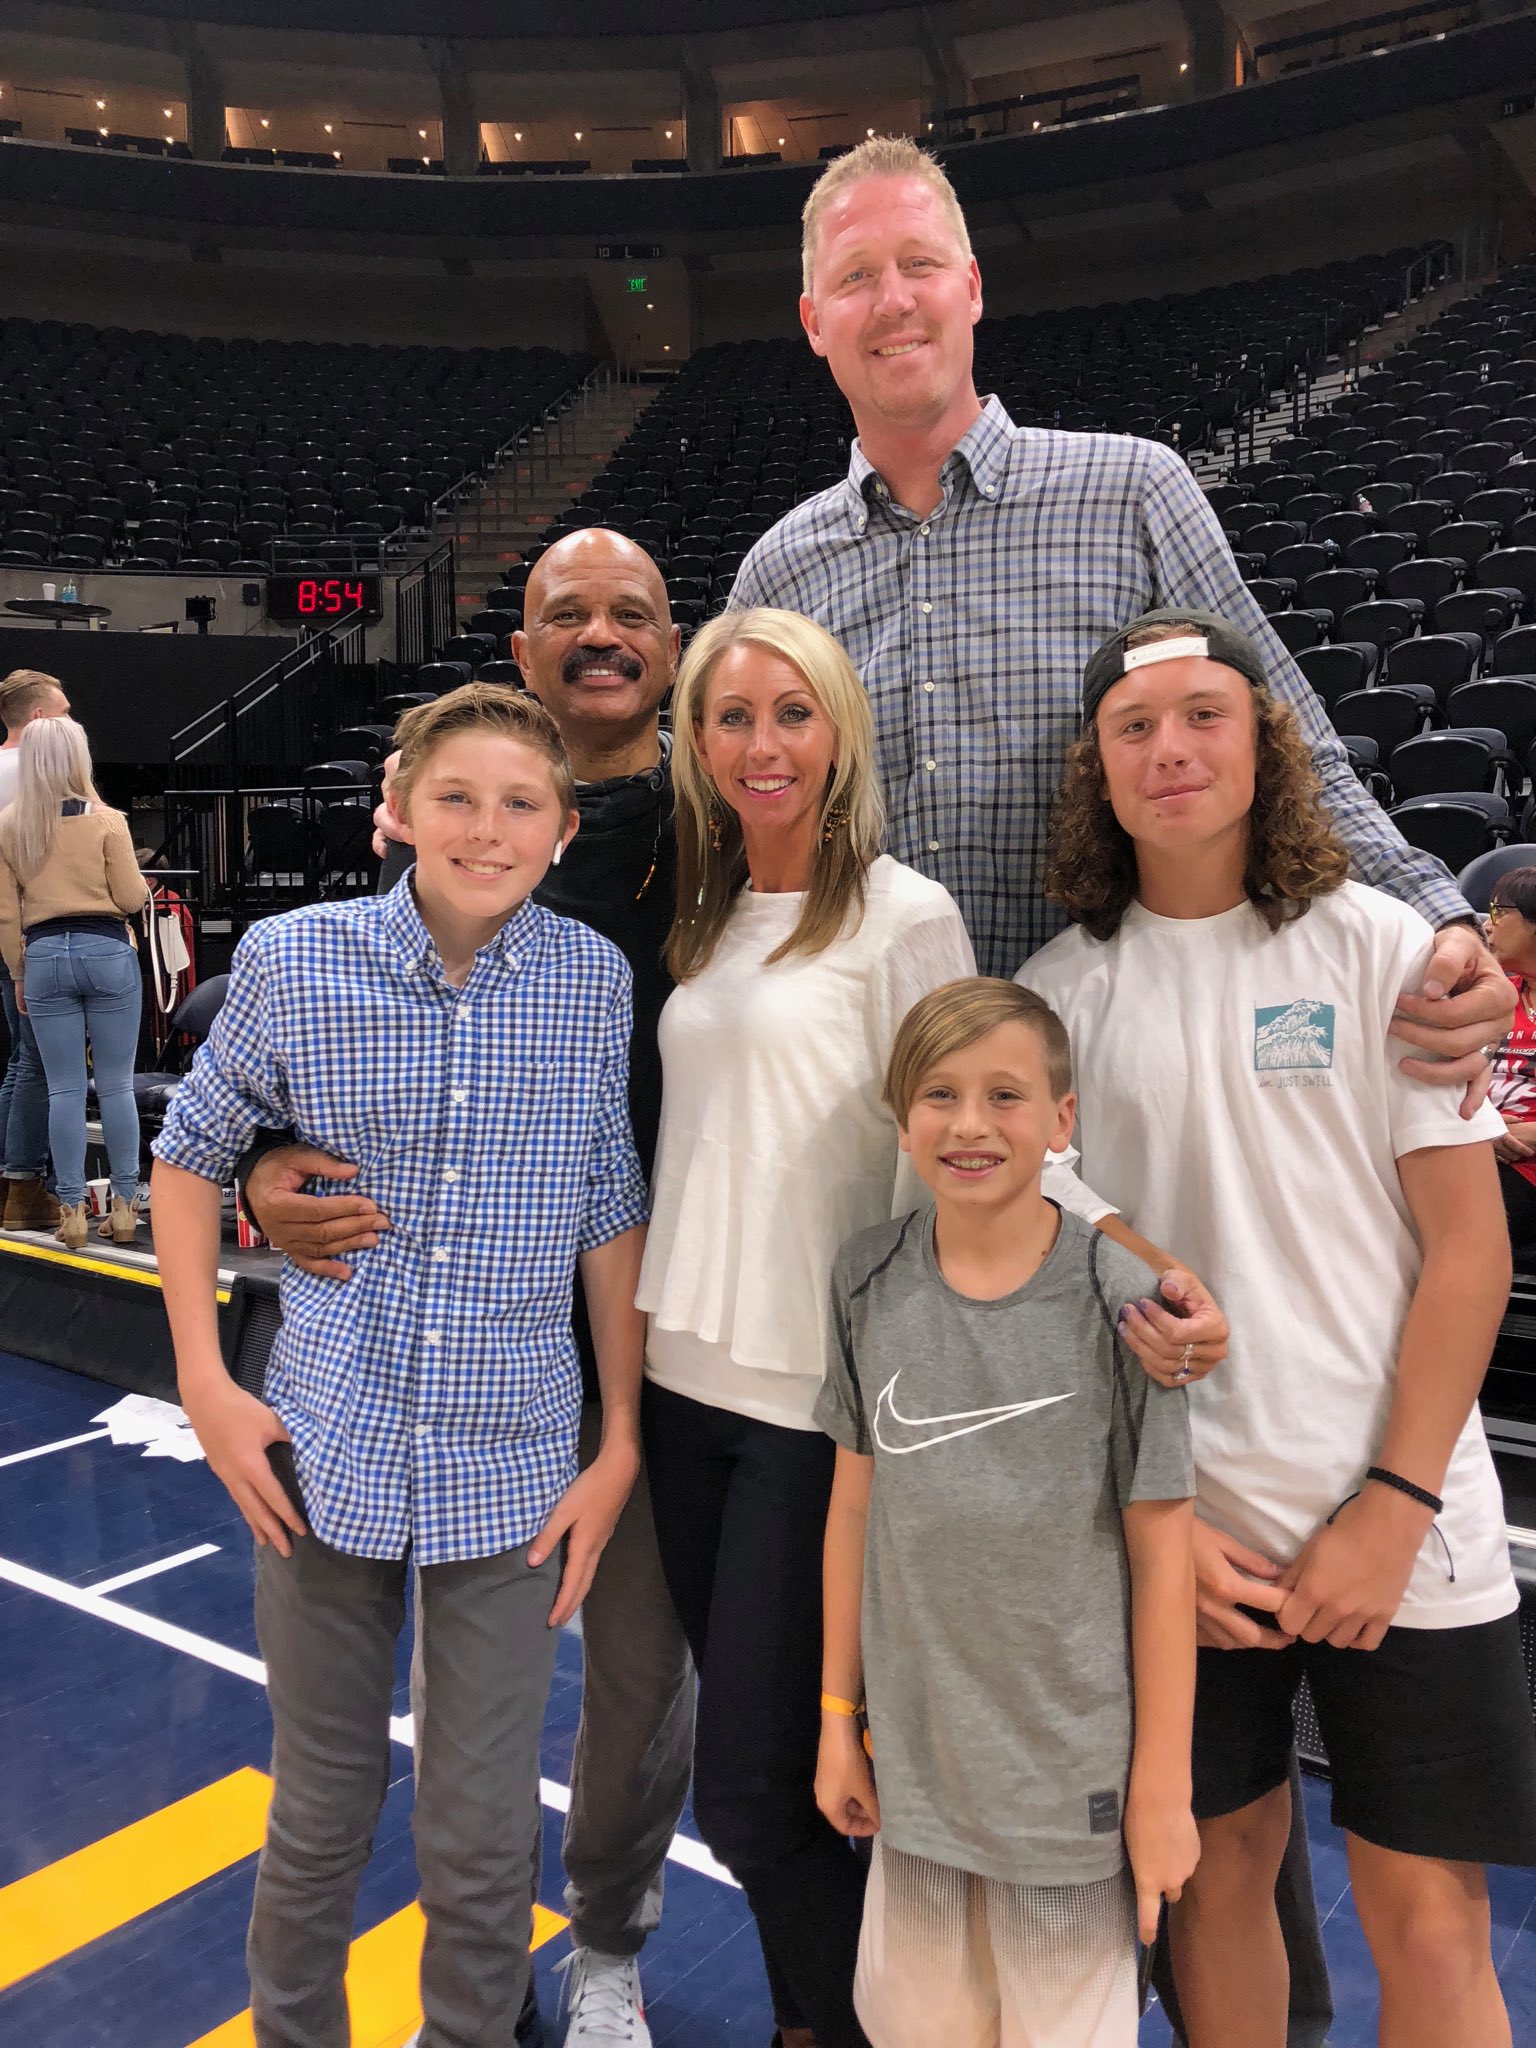 JOHN LUCAS ENT on Twitter: "Great catching up with Shawn Bradley and